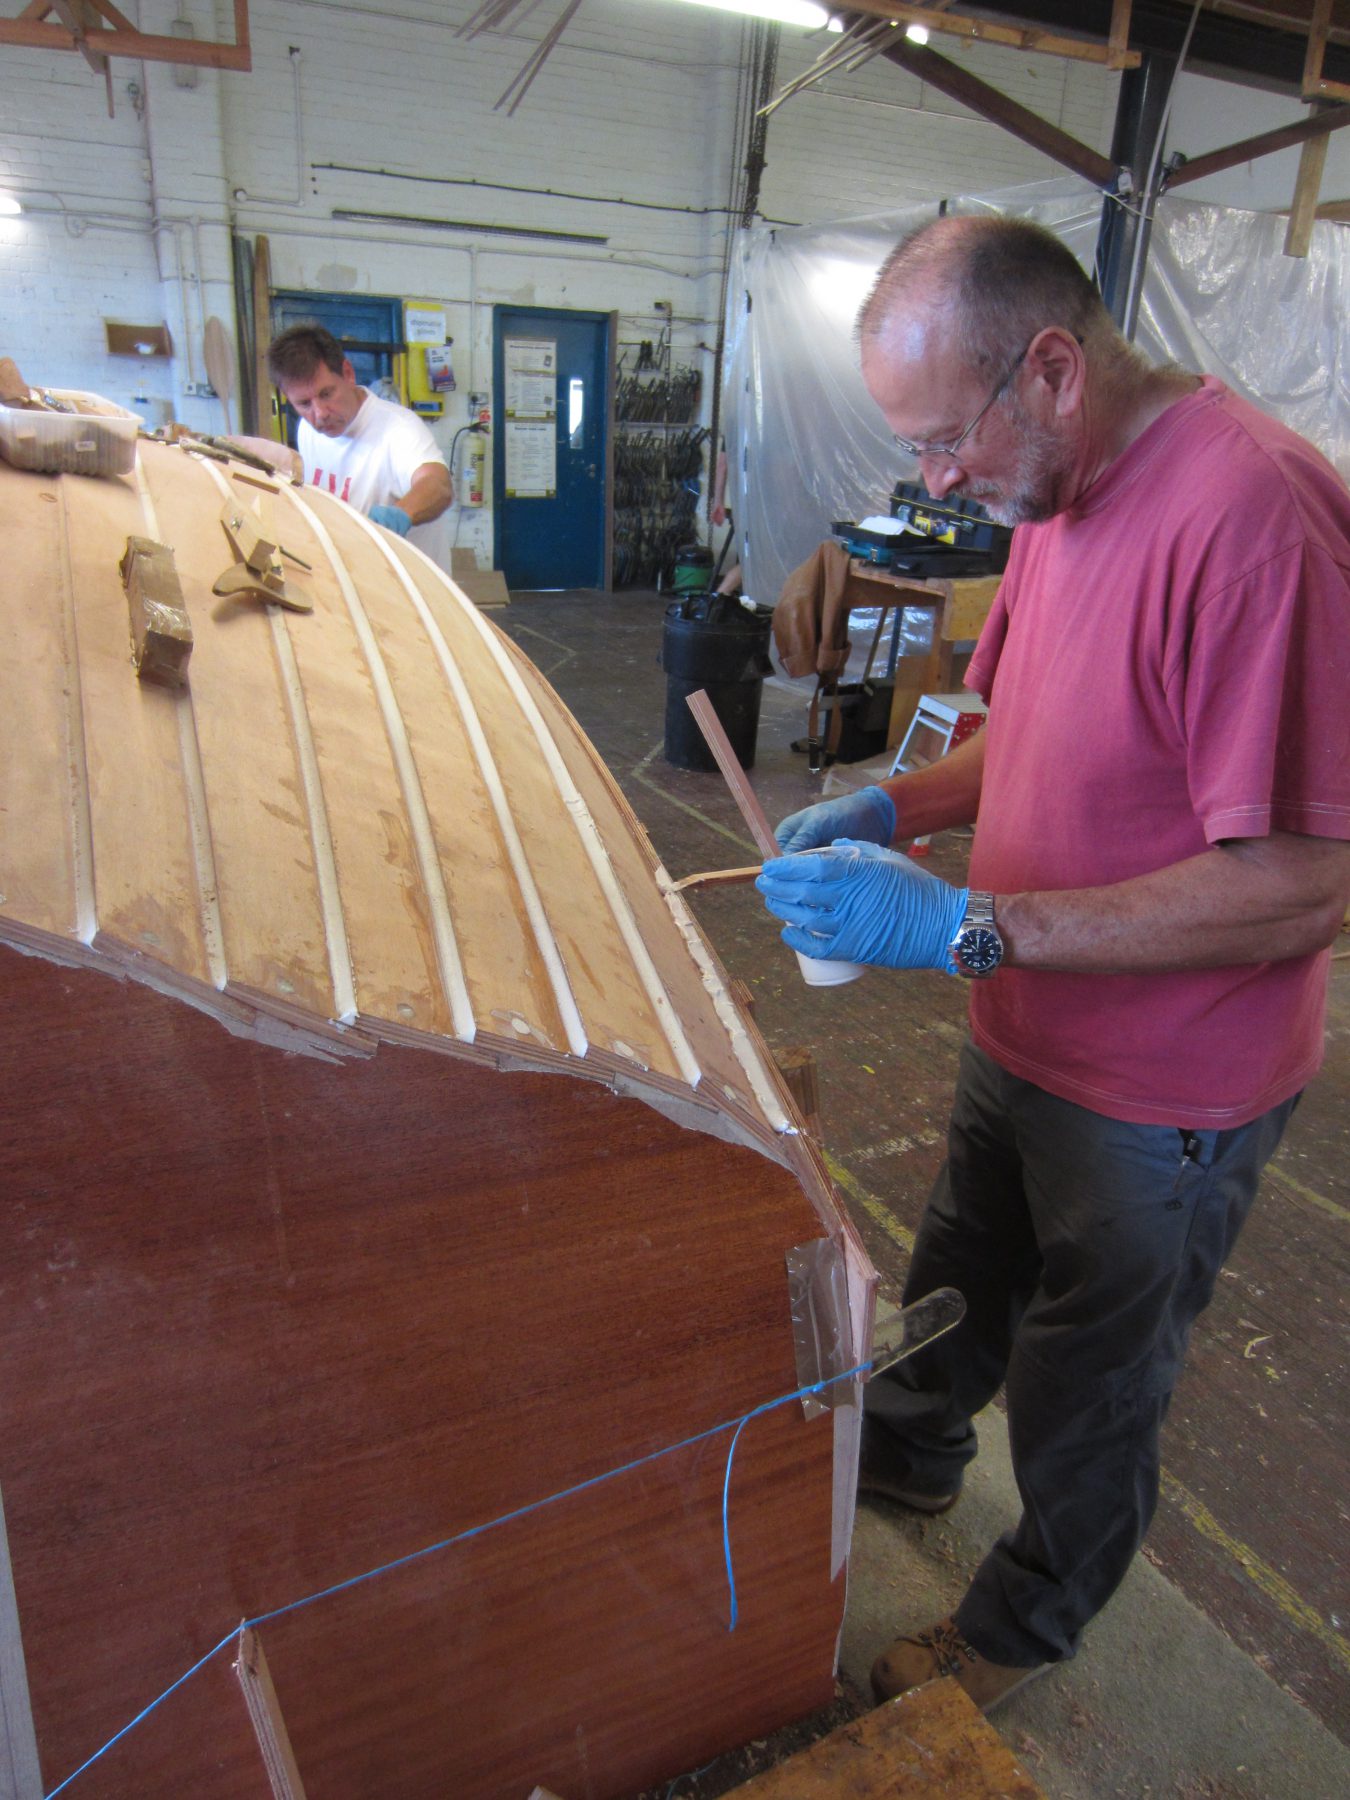 New beginnings: starting again as a boat builder